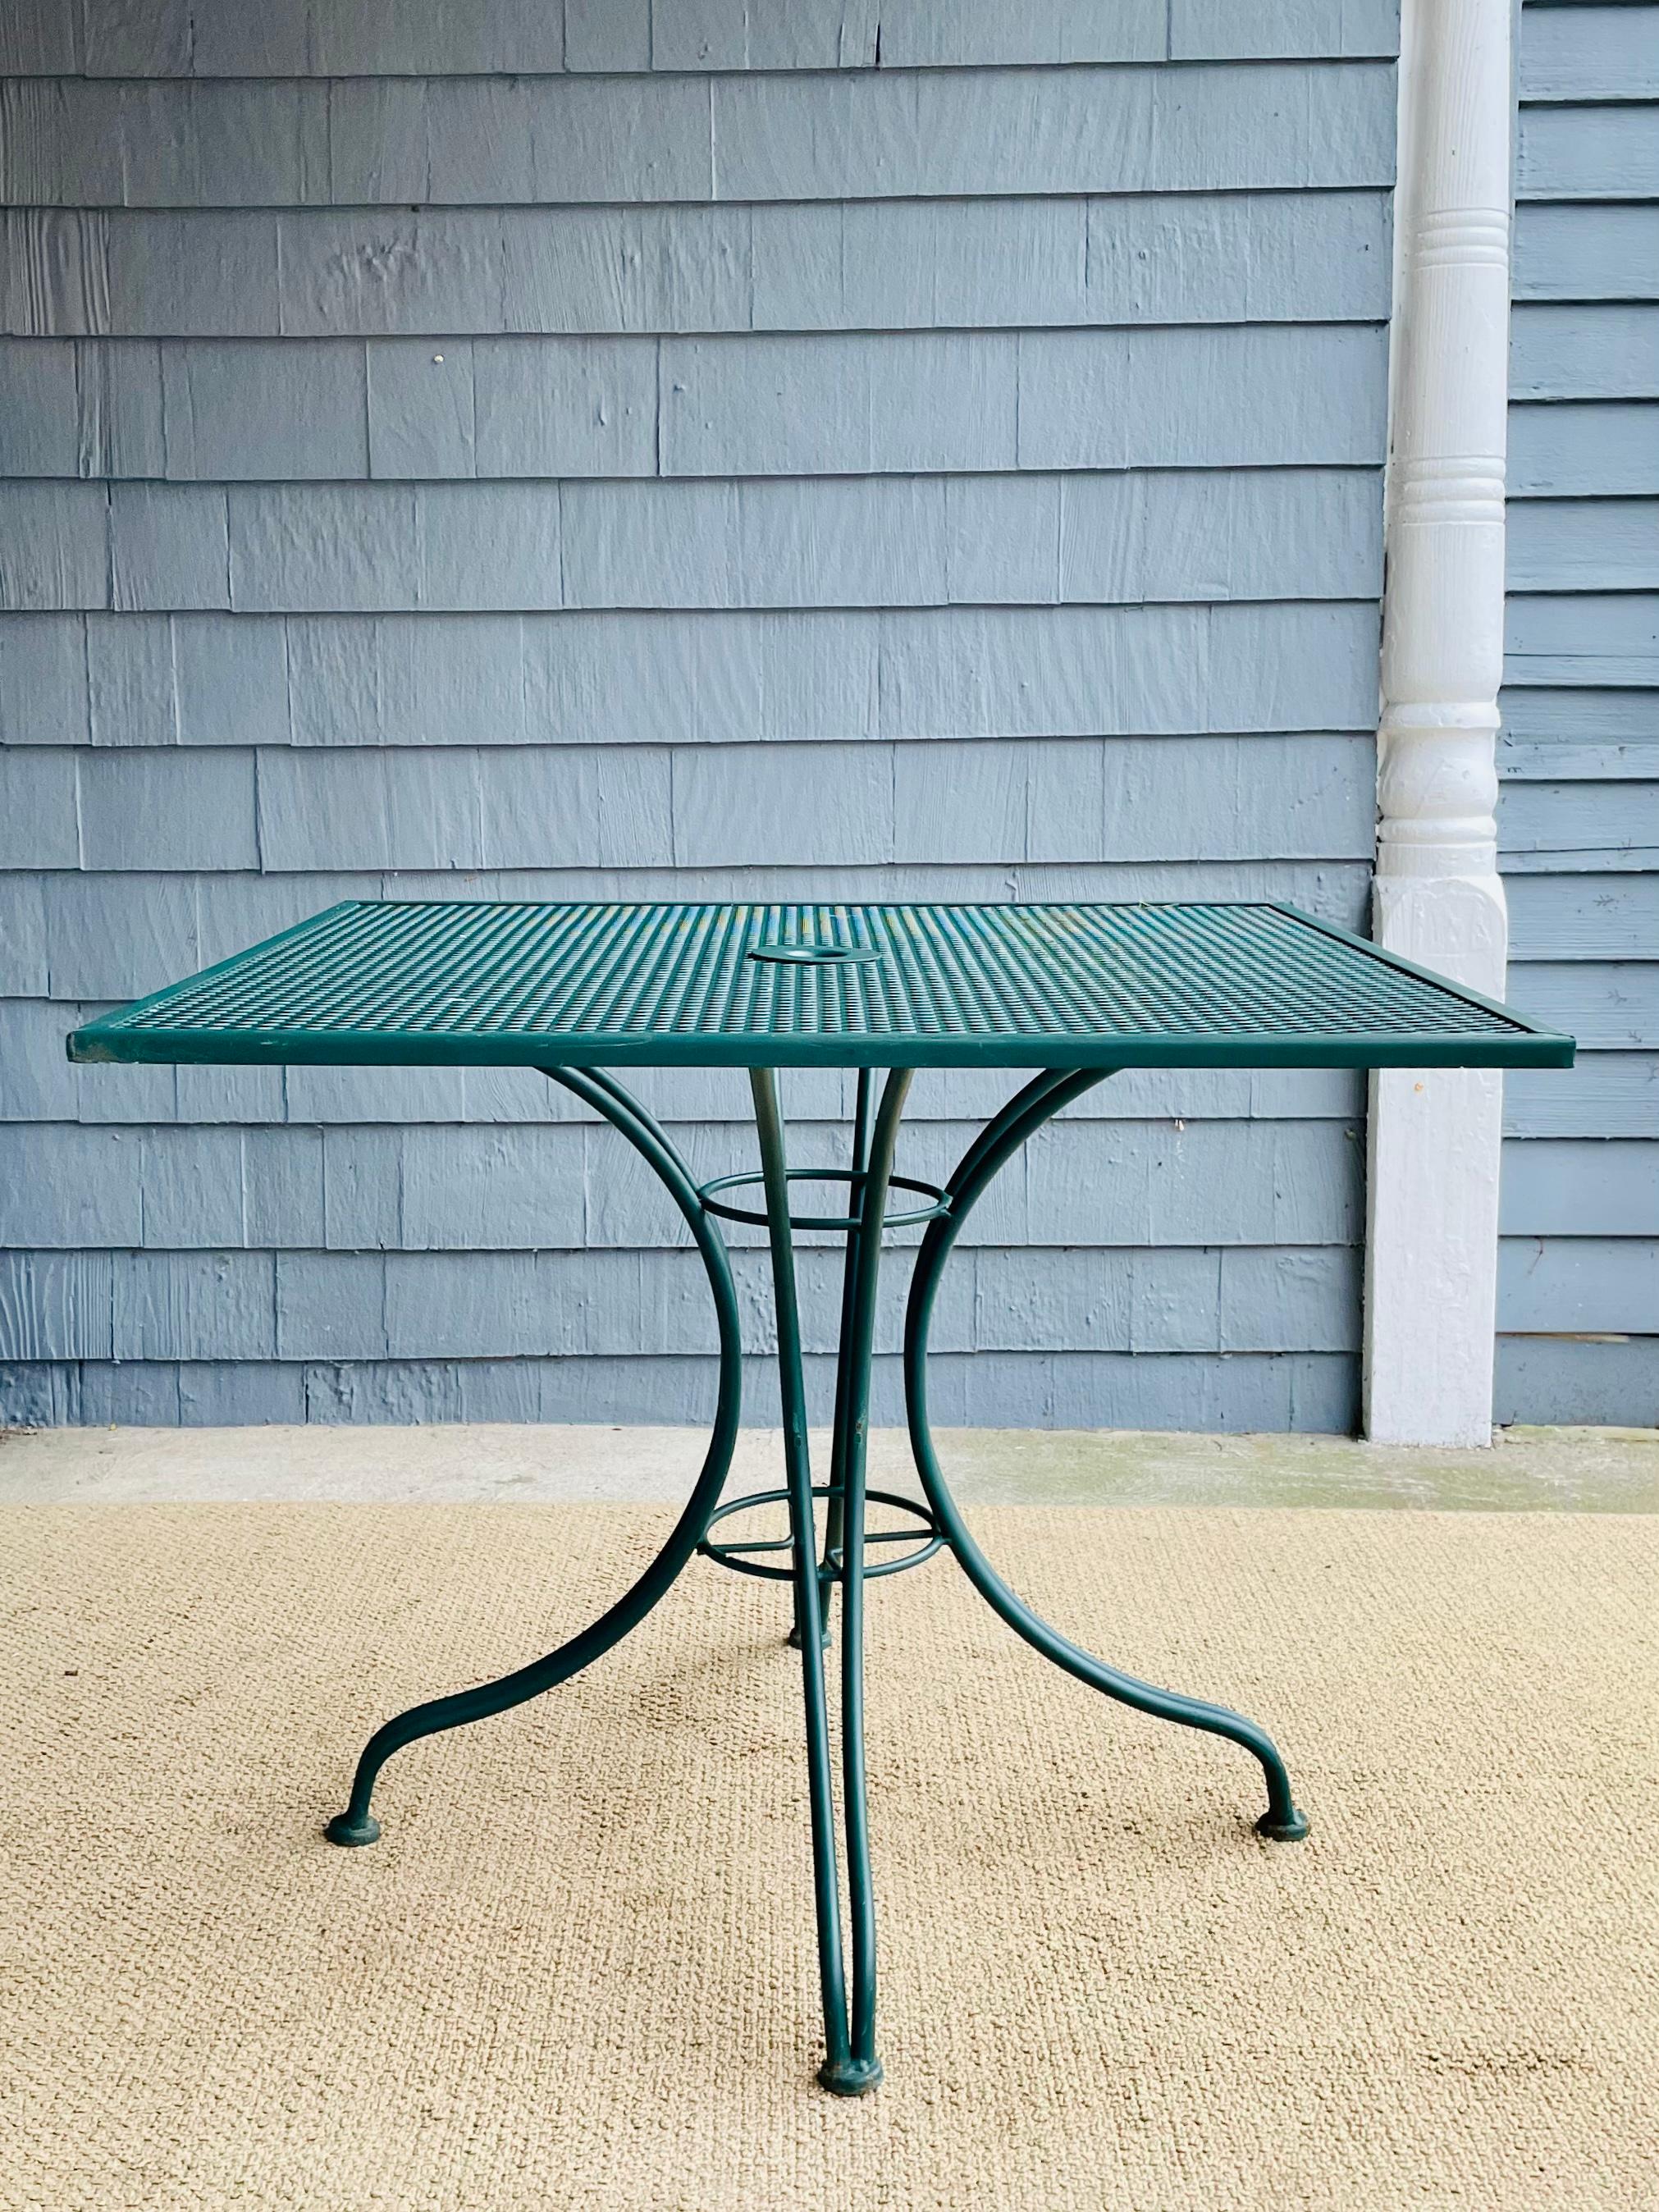 Available now for your enjoyment and ready to ship is a Vintage Wrought Iron Square Outdoor Patio Table. 

This lovely Wrought Iron Patio Table is the perfect addition to any garden, terrace, or veranda. Enjoy a glass of lemonade in the late